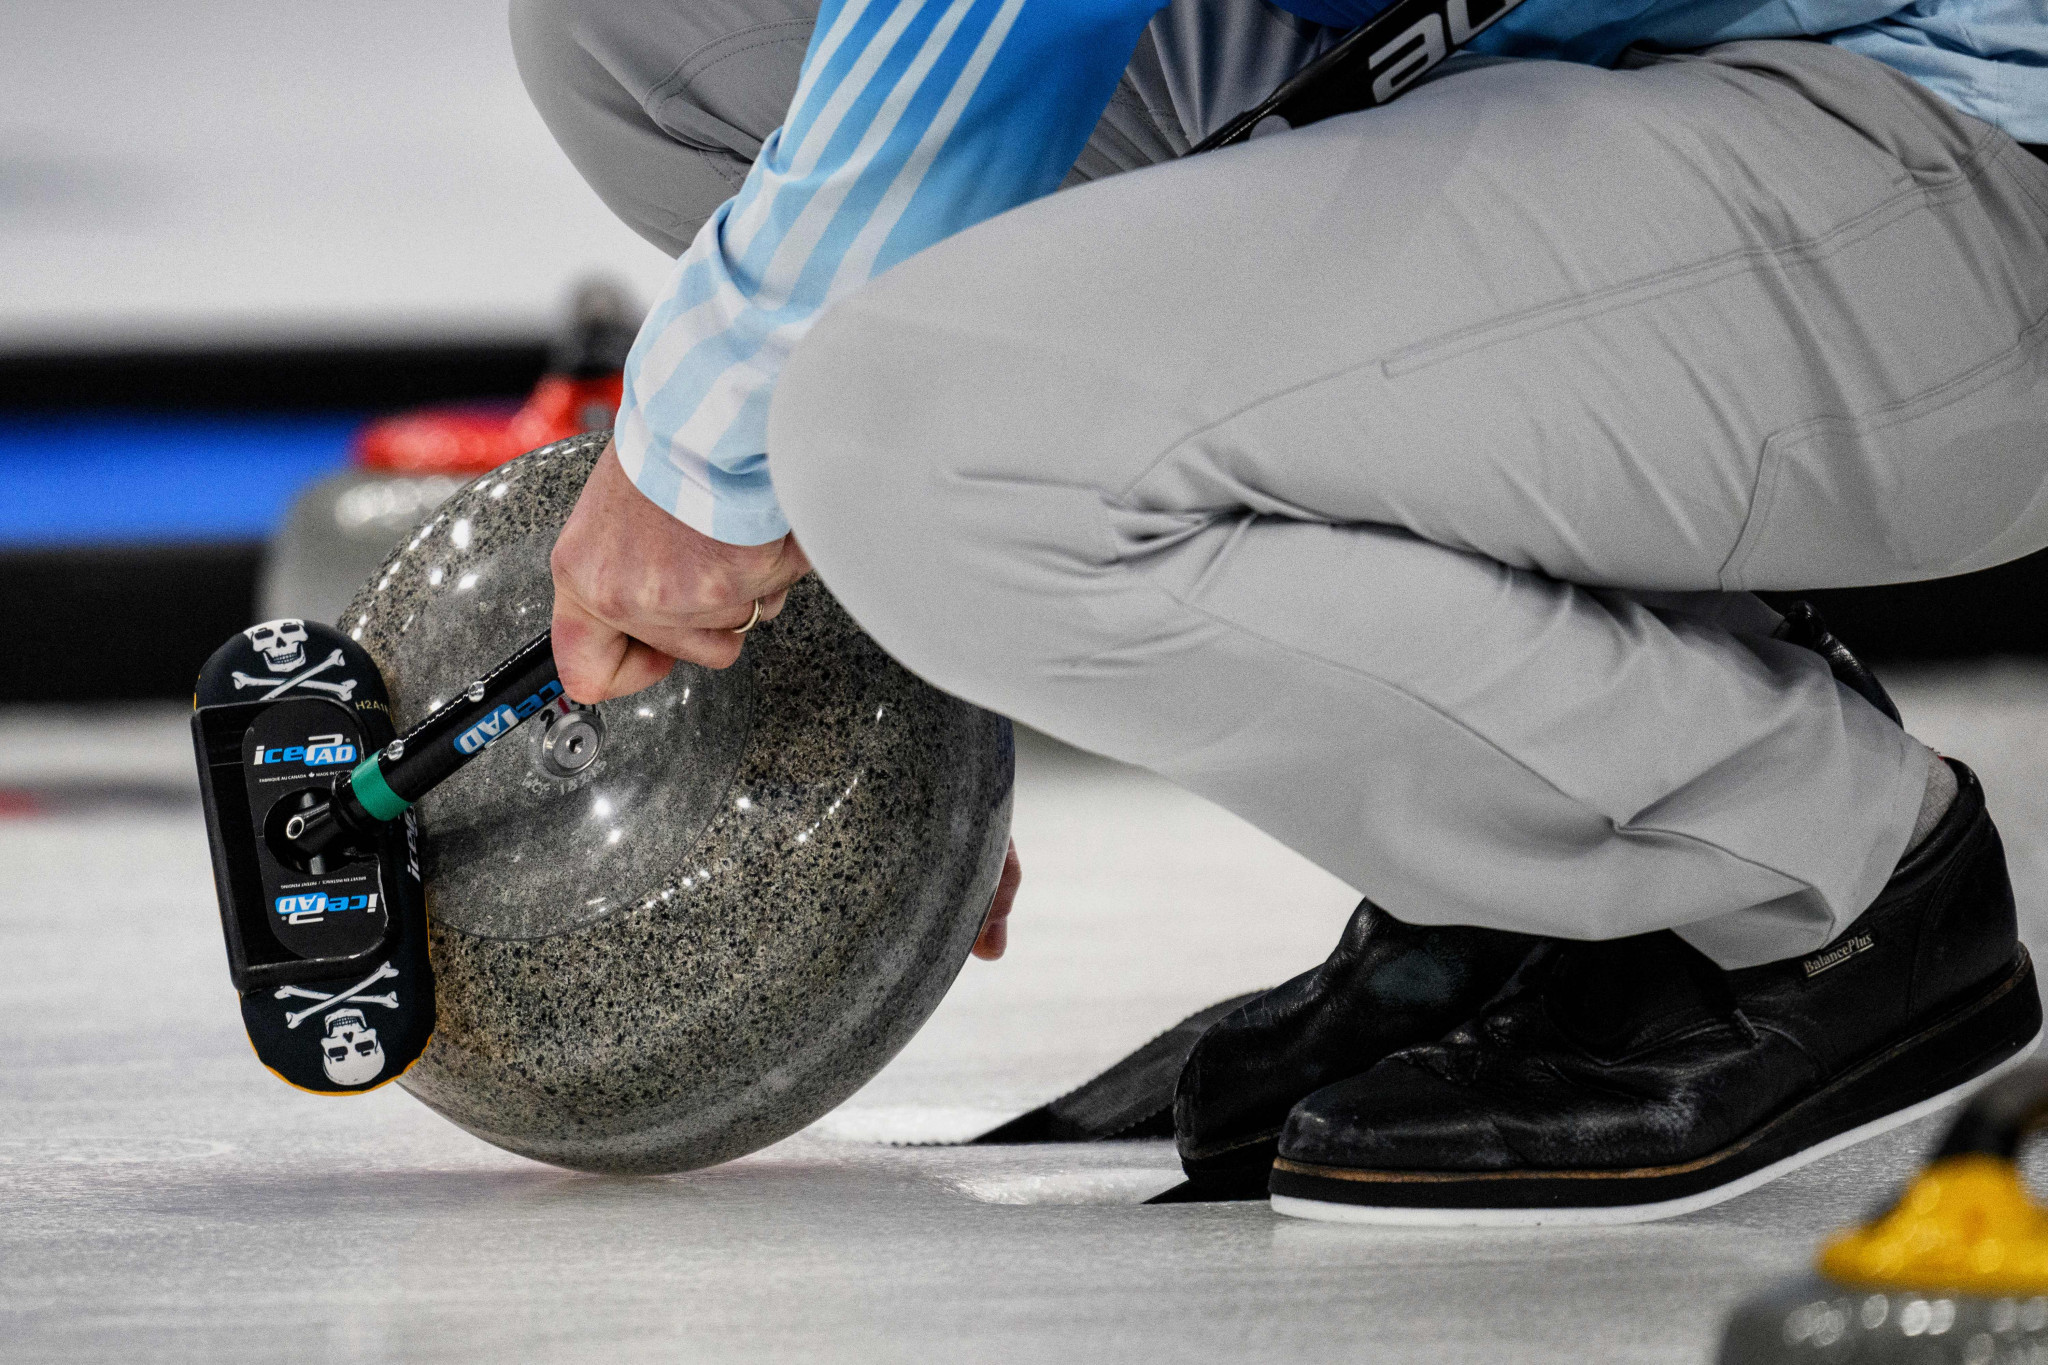 Holders Canada stunned by Finland at World Mixed Curling Championship